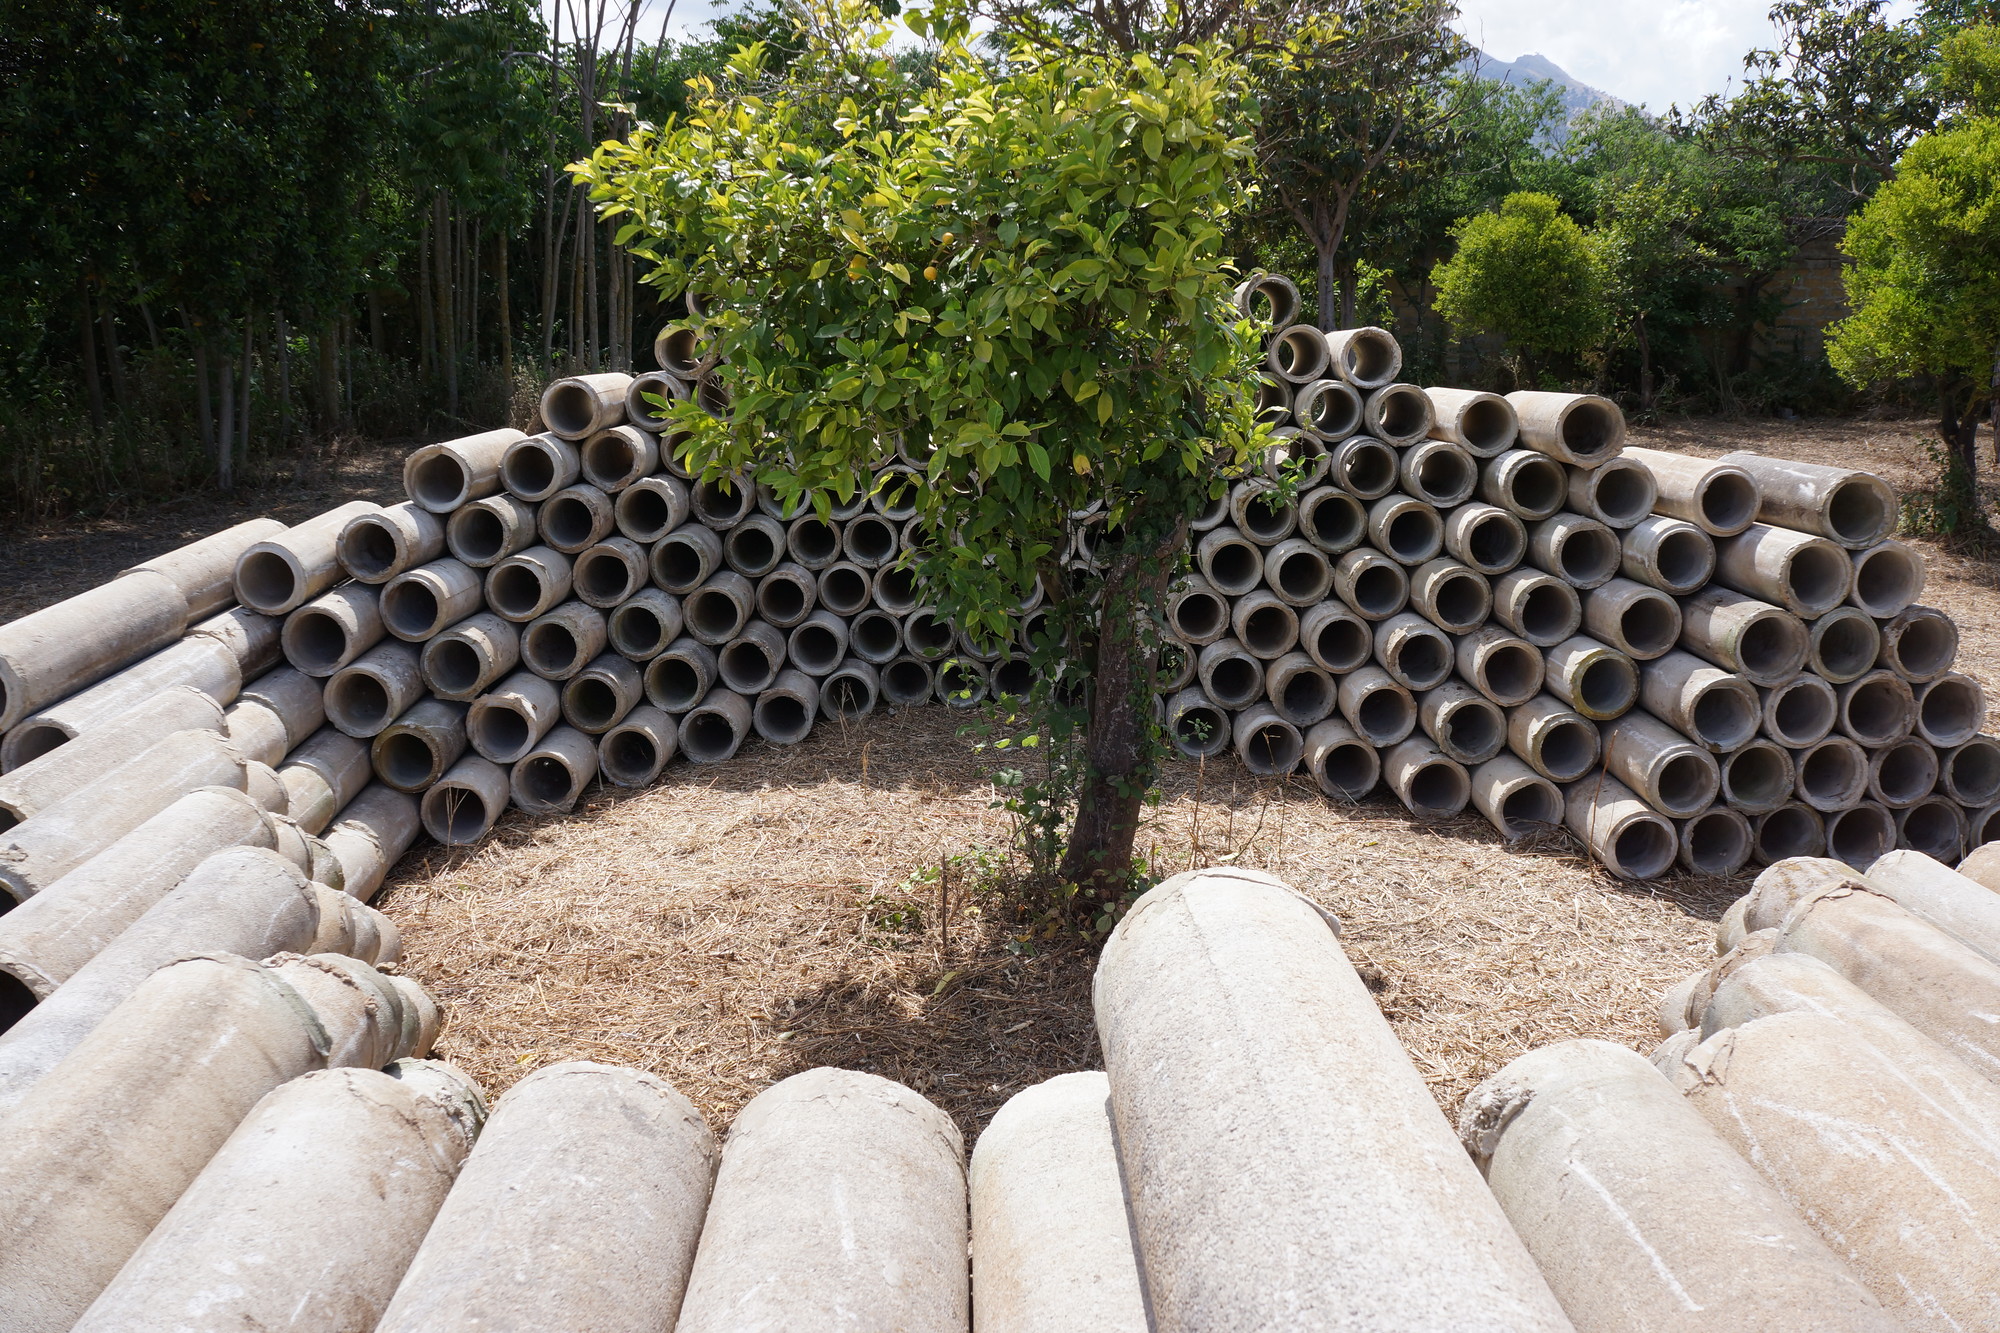 A light green tree grows in the center of the photo, surrounded by light gray concrete tubes stacked on all sides. There are more trees growing in the background of the photo.